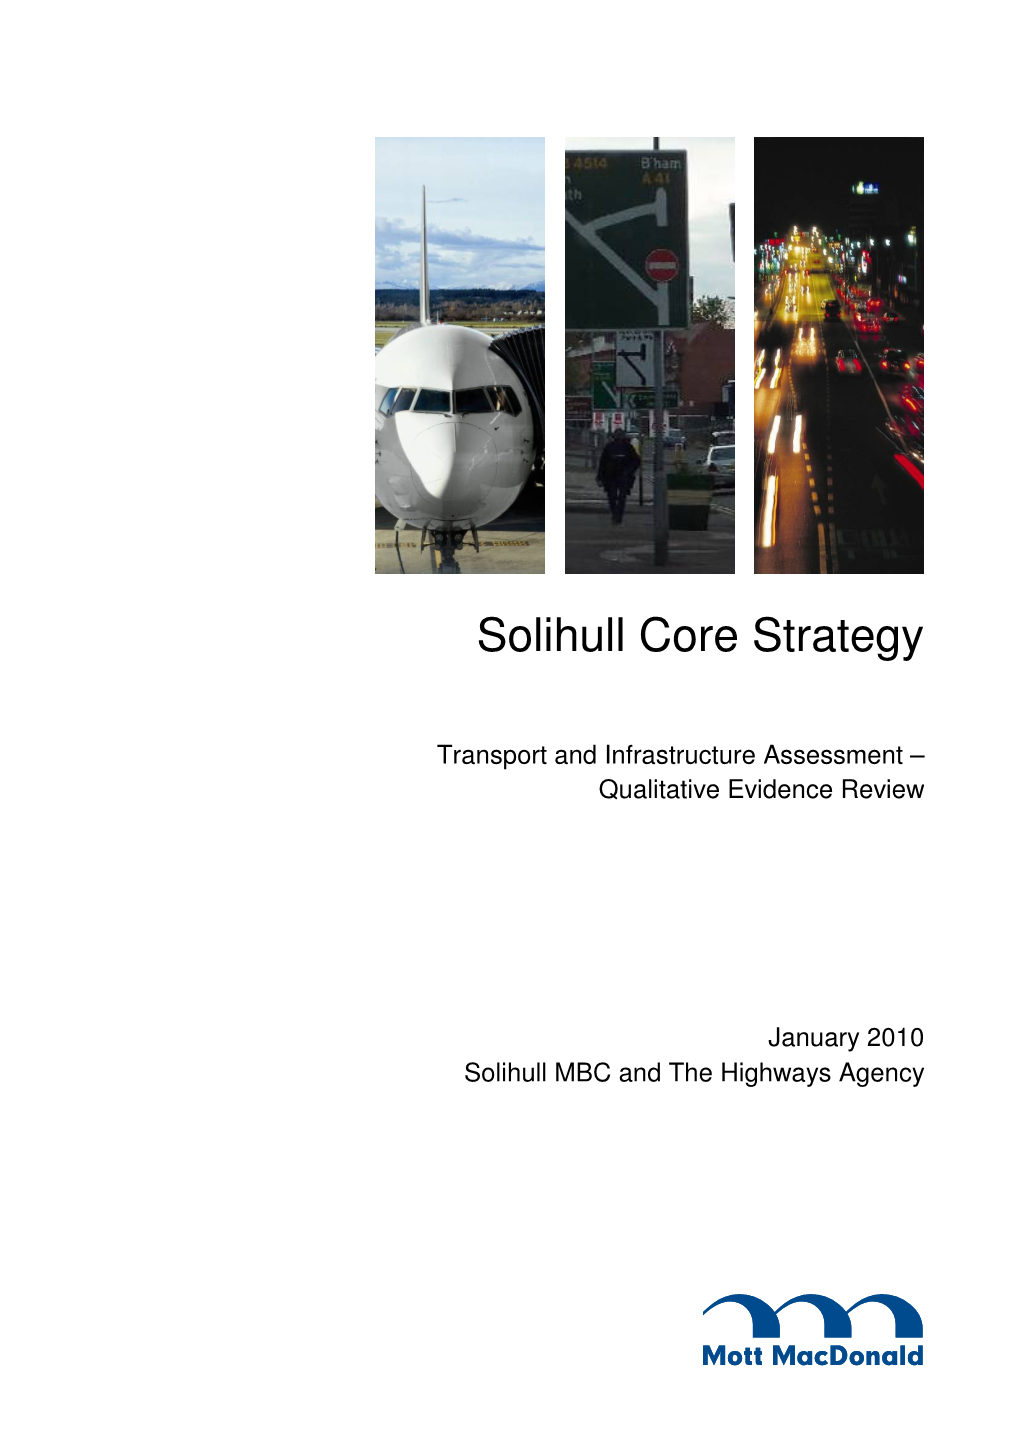 Solihull Core Strategy